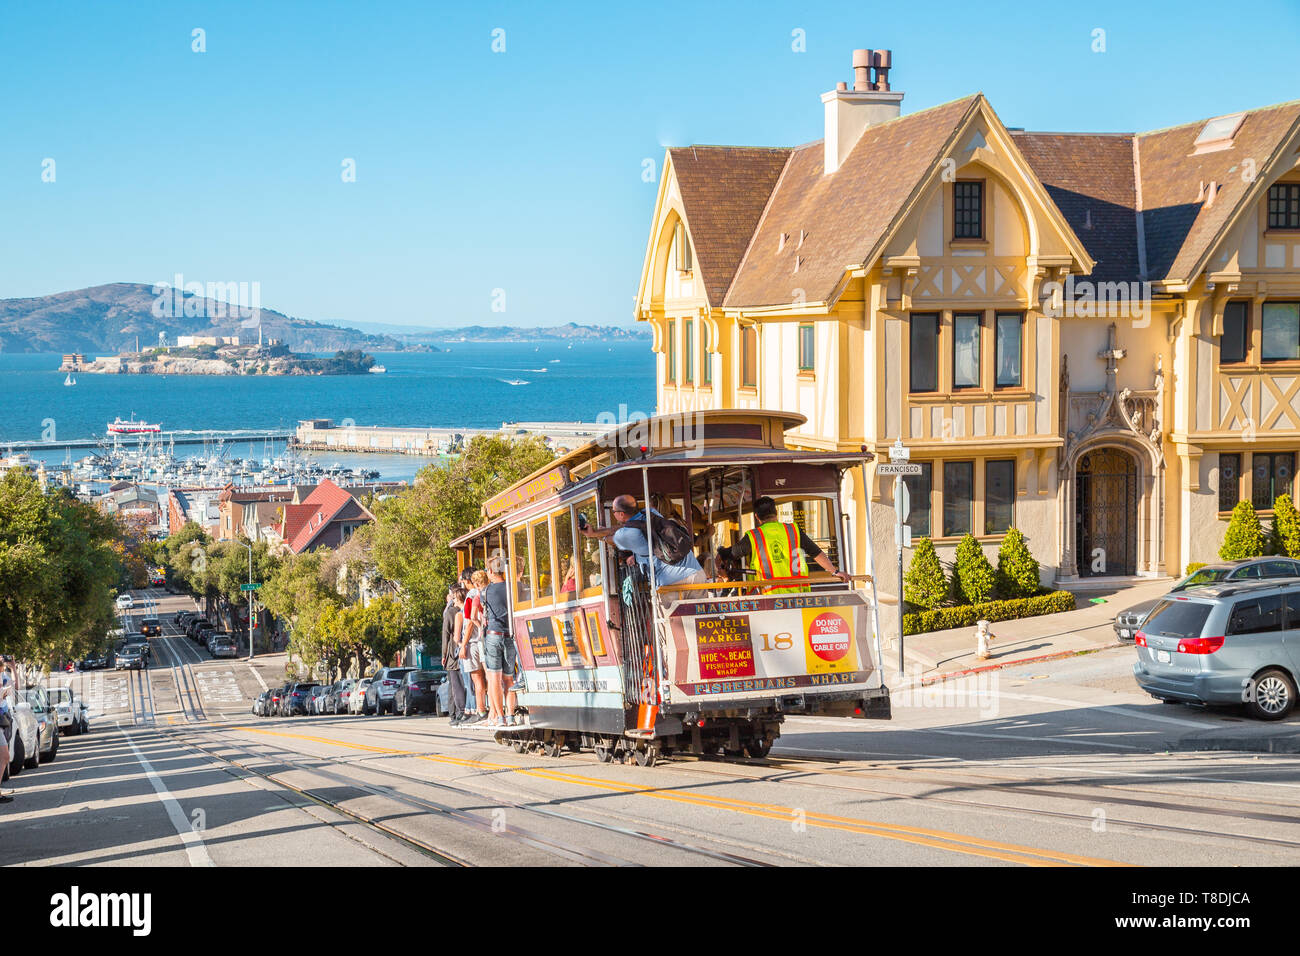 SAN FRANCISCO, USA - SEPTEMBER 25, 2016: Powell-Hyde cable car climbing up steep hill in central San Francisco with famous Alcatraz Island in the back Stock Photo